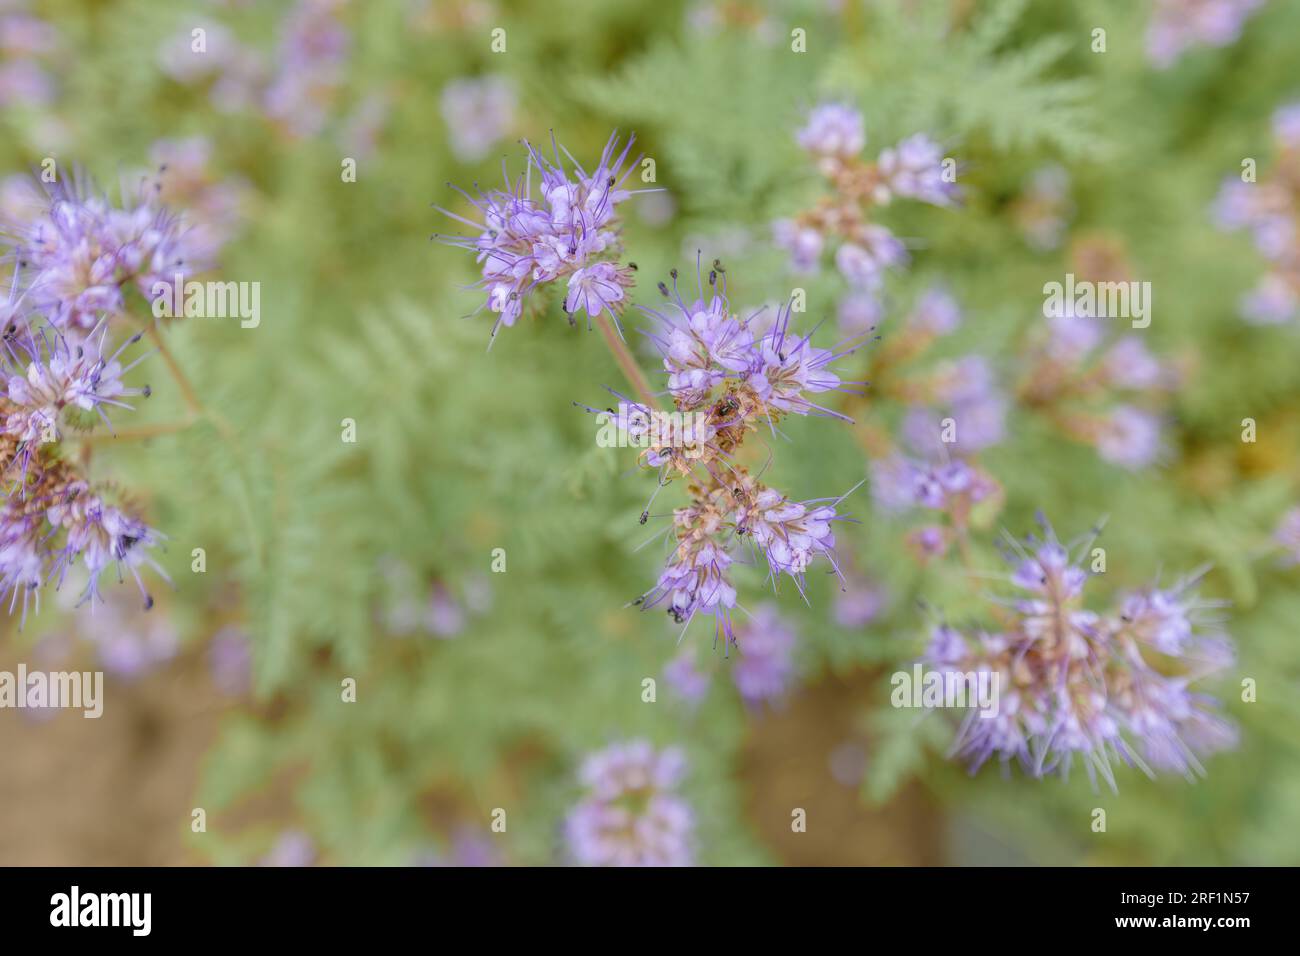 Blue tansy of phacelia flowering plant in cultivated field, selective focus Stock Photo